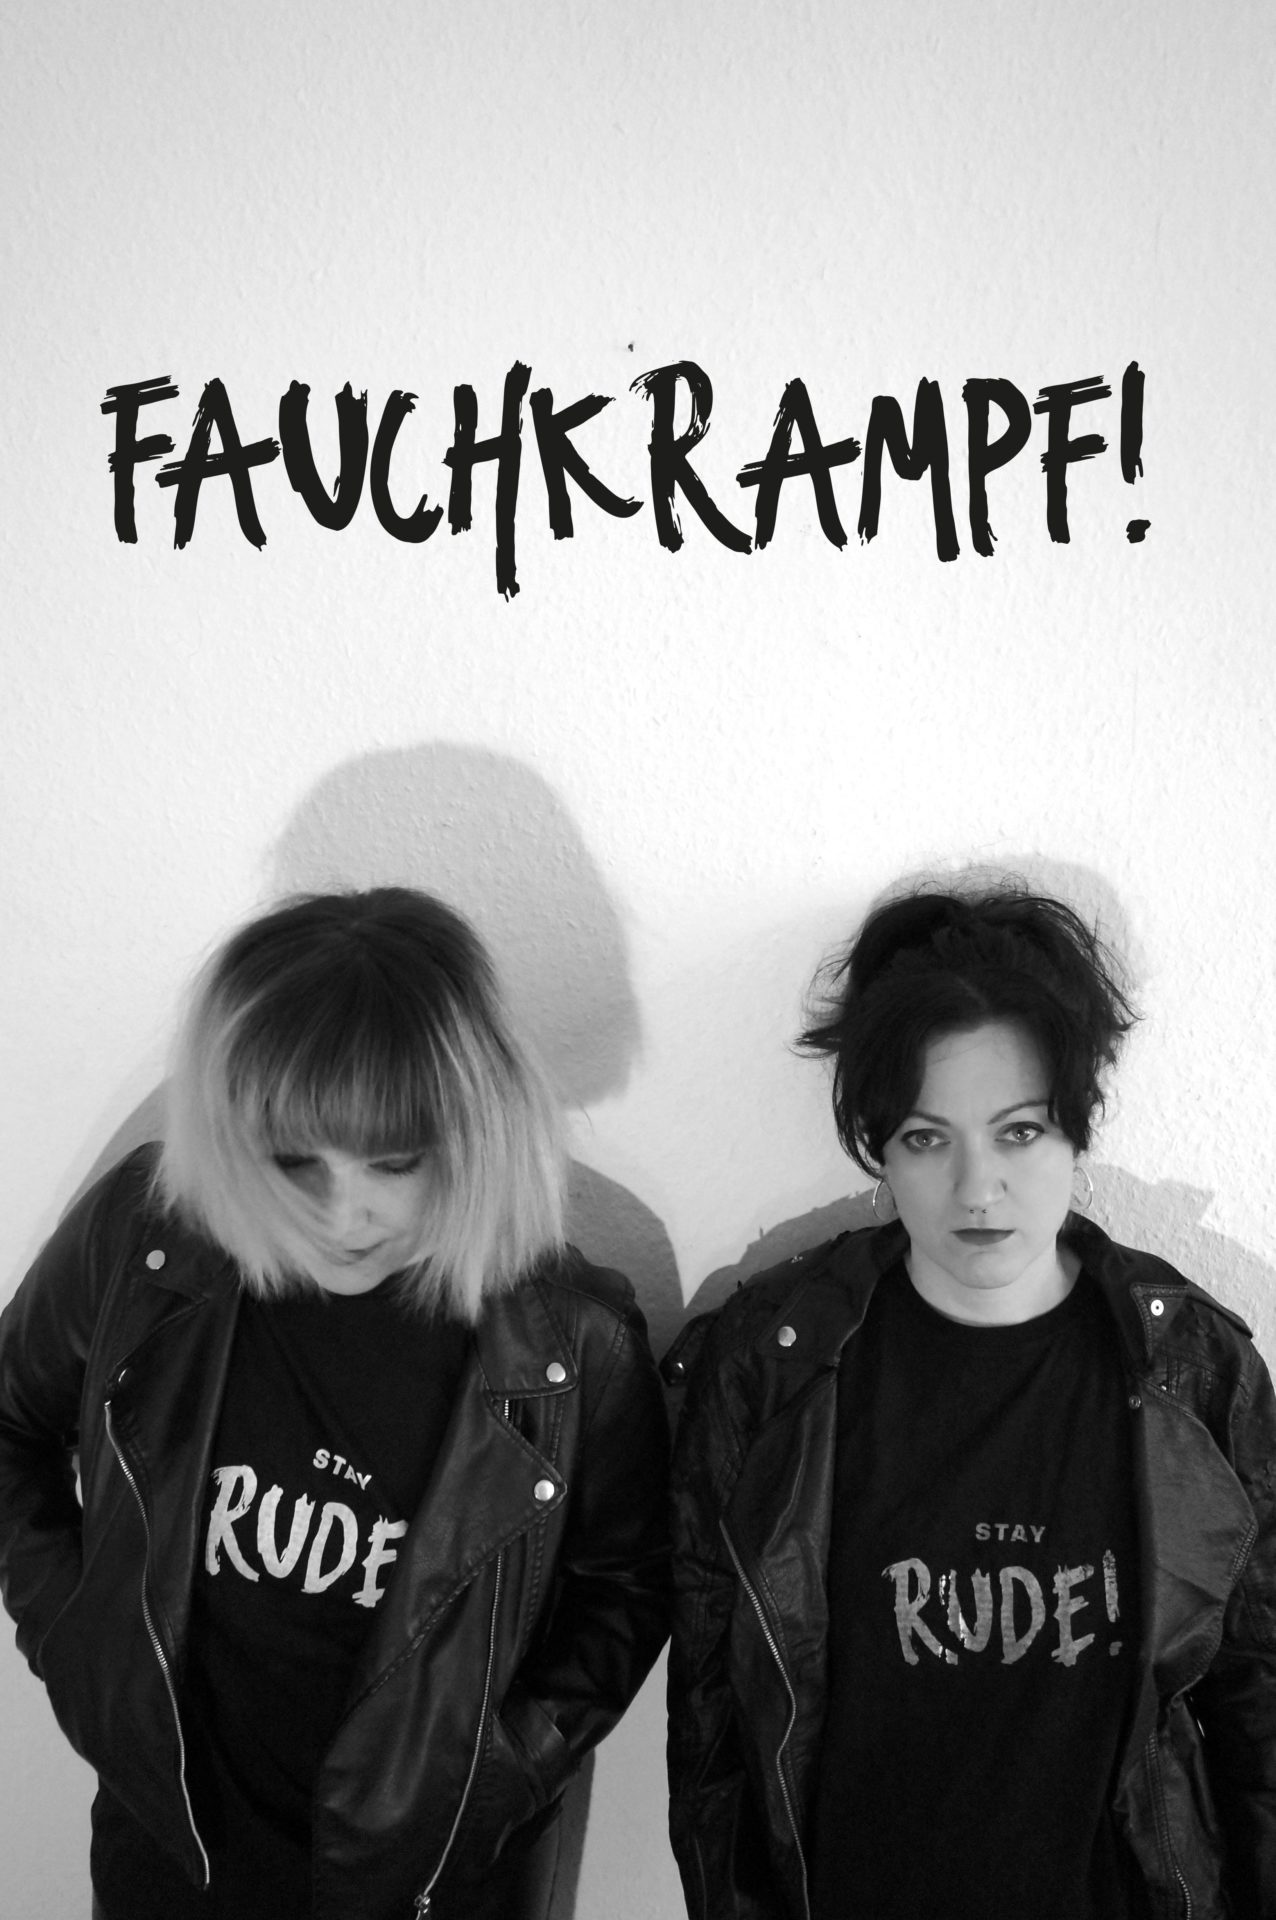 FAUCHKRAMPF! MUSIC AGENCY FOR ANGRY FEMINISTS – Ein Gespräch 1